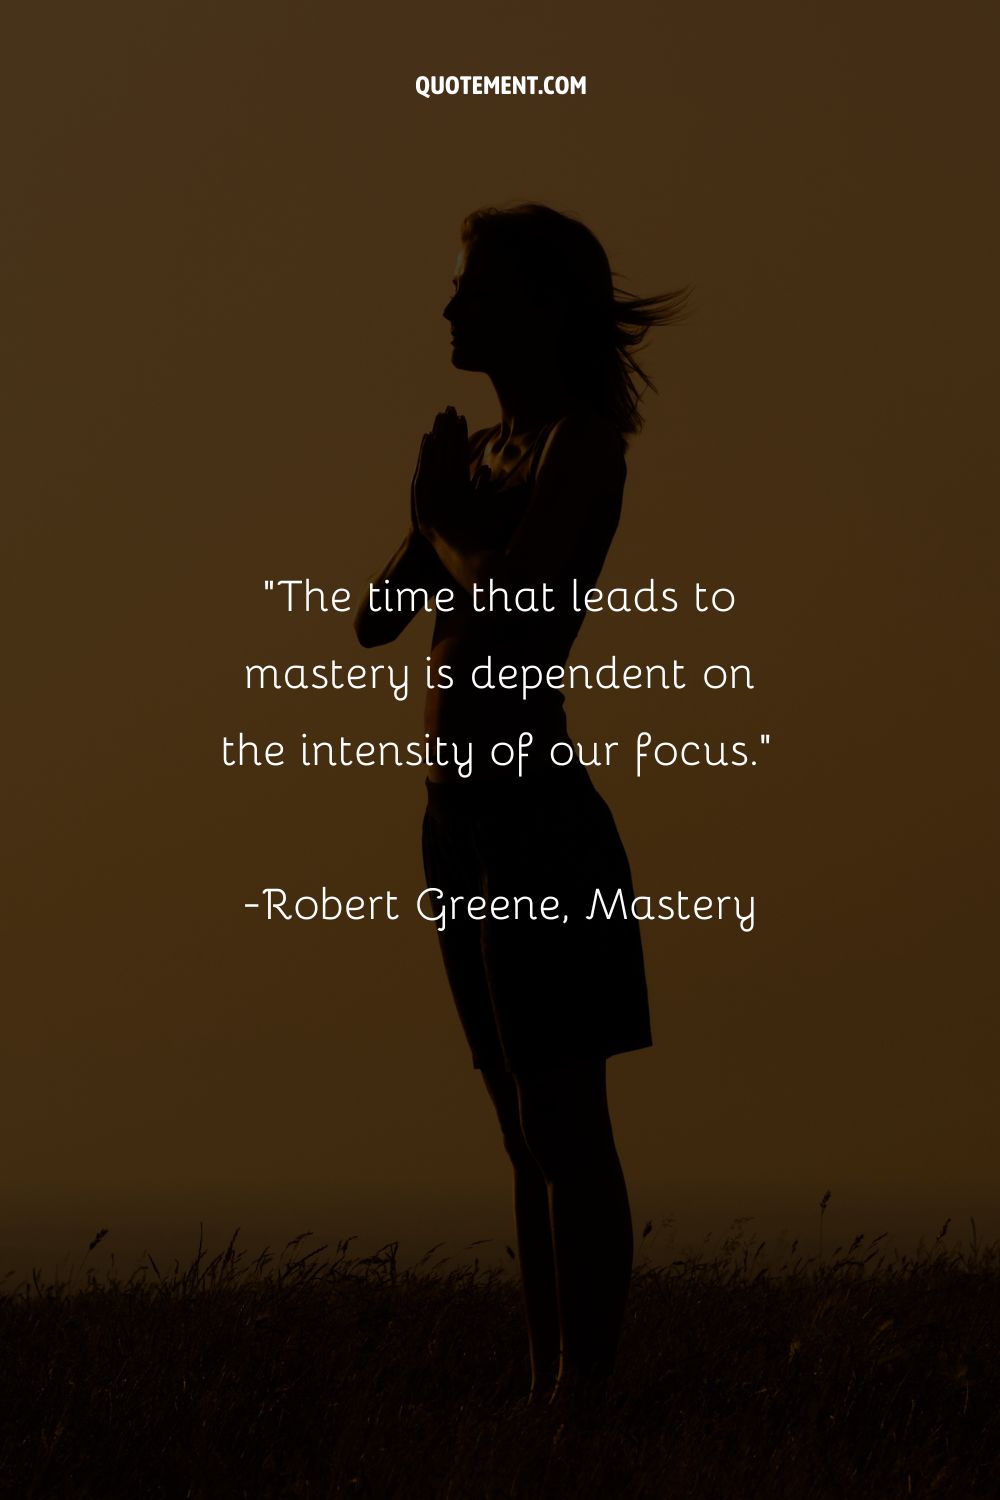 The time that leads to mastery is dependent on the intensity of our focus